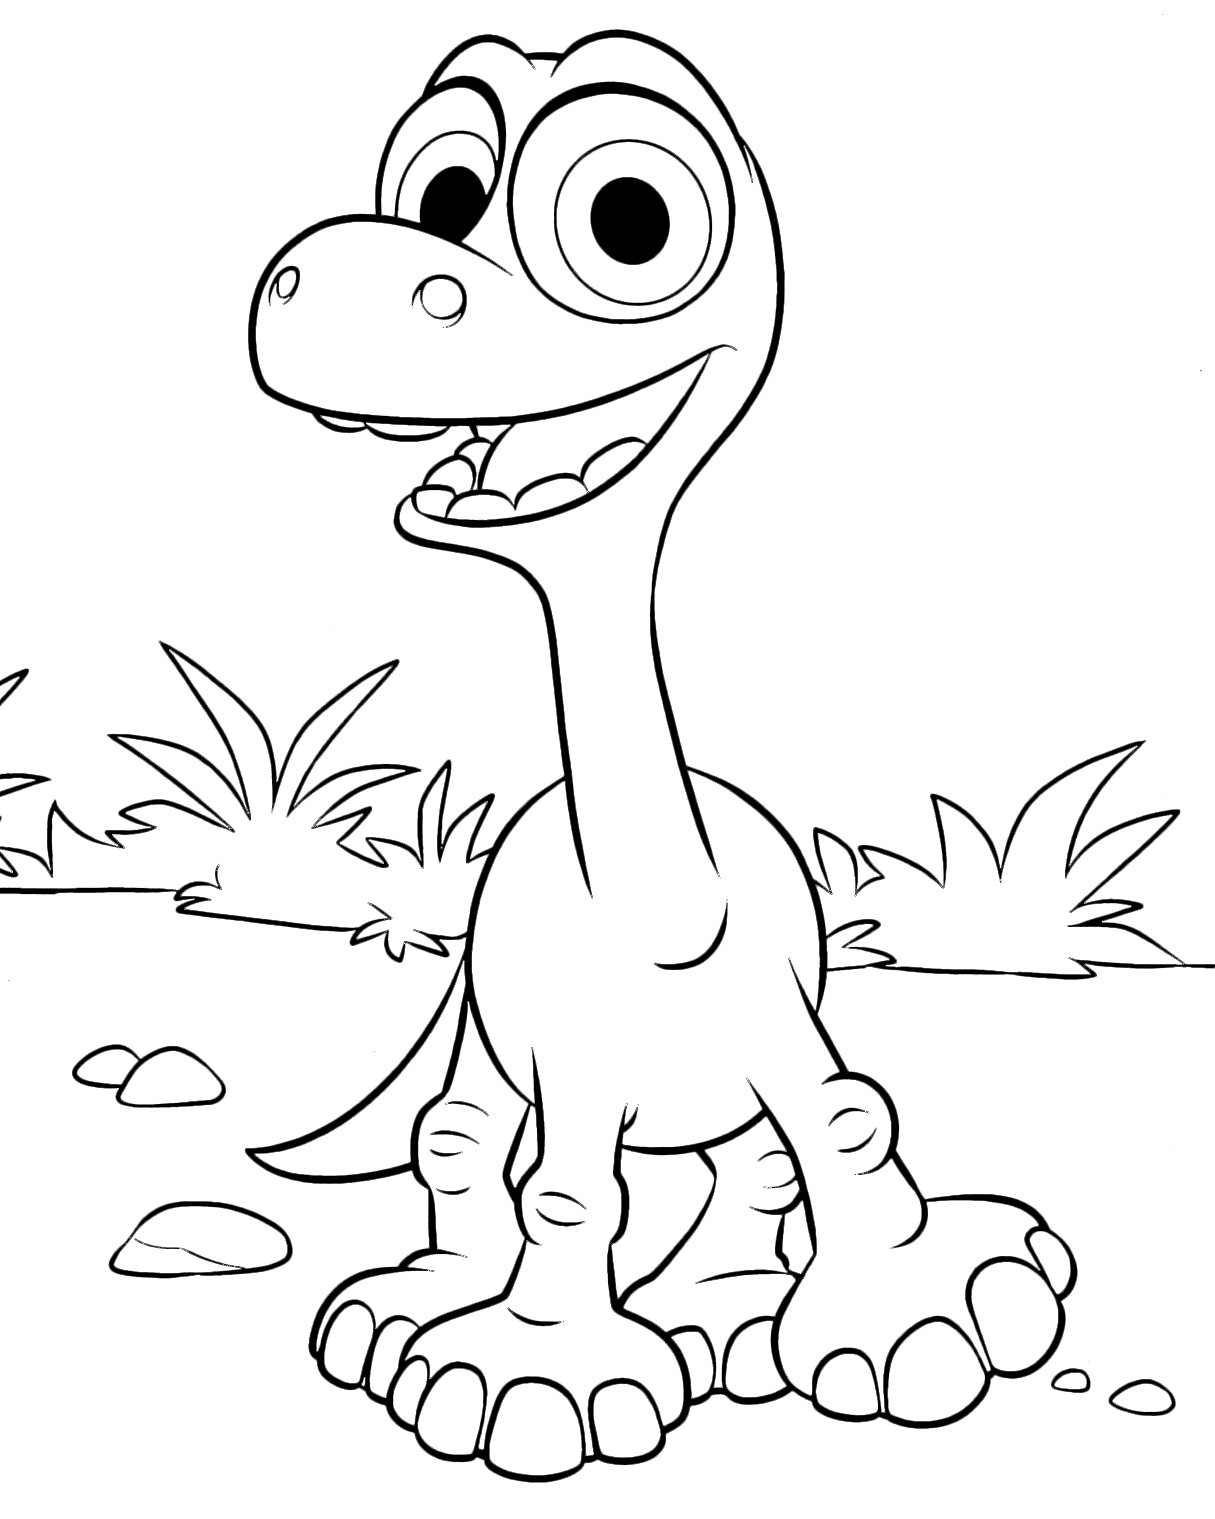 The good dinosaur coloring pages printable for free download